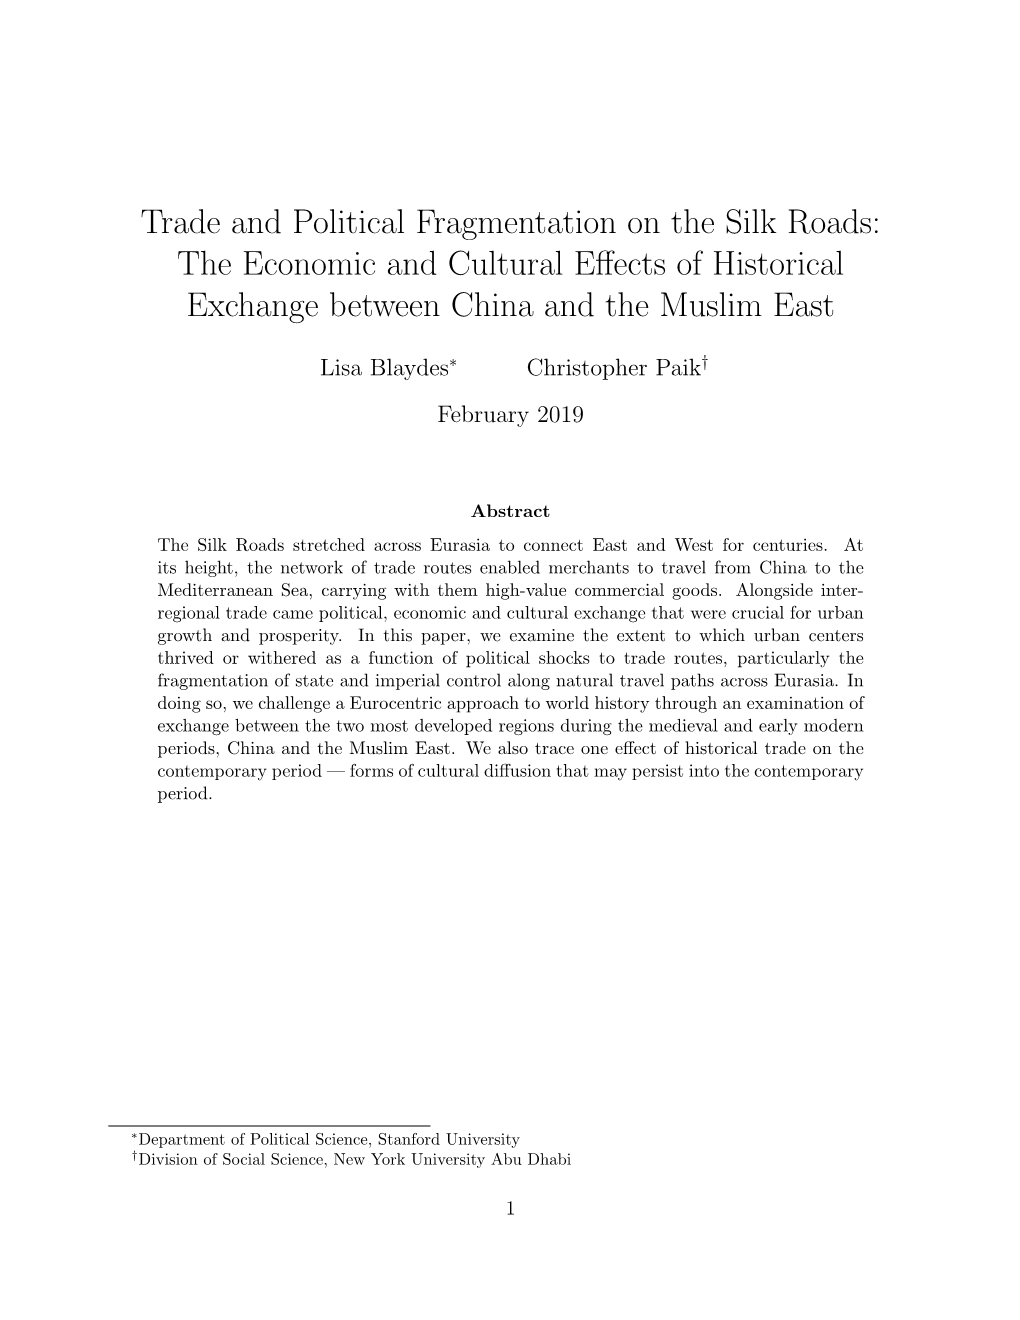 Trade and Political Fragmentation on the Silk Roads: the Economic and Cultural Eﬀects of Historical Exchange Between China and the Muslim East